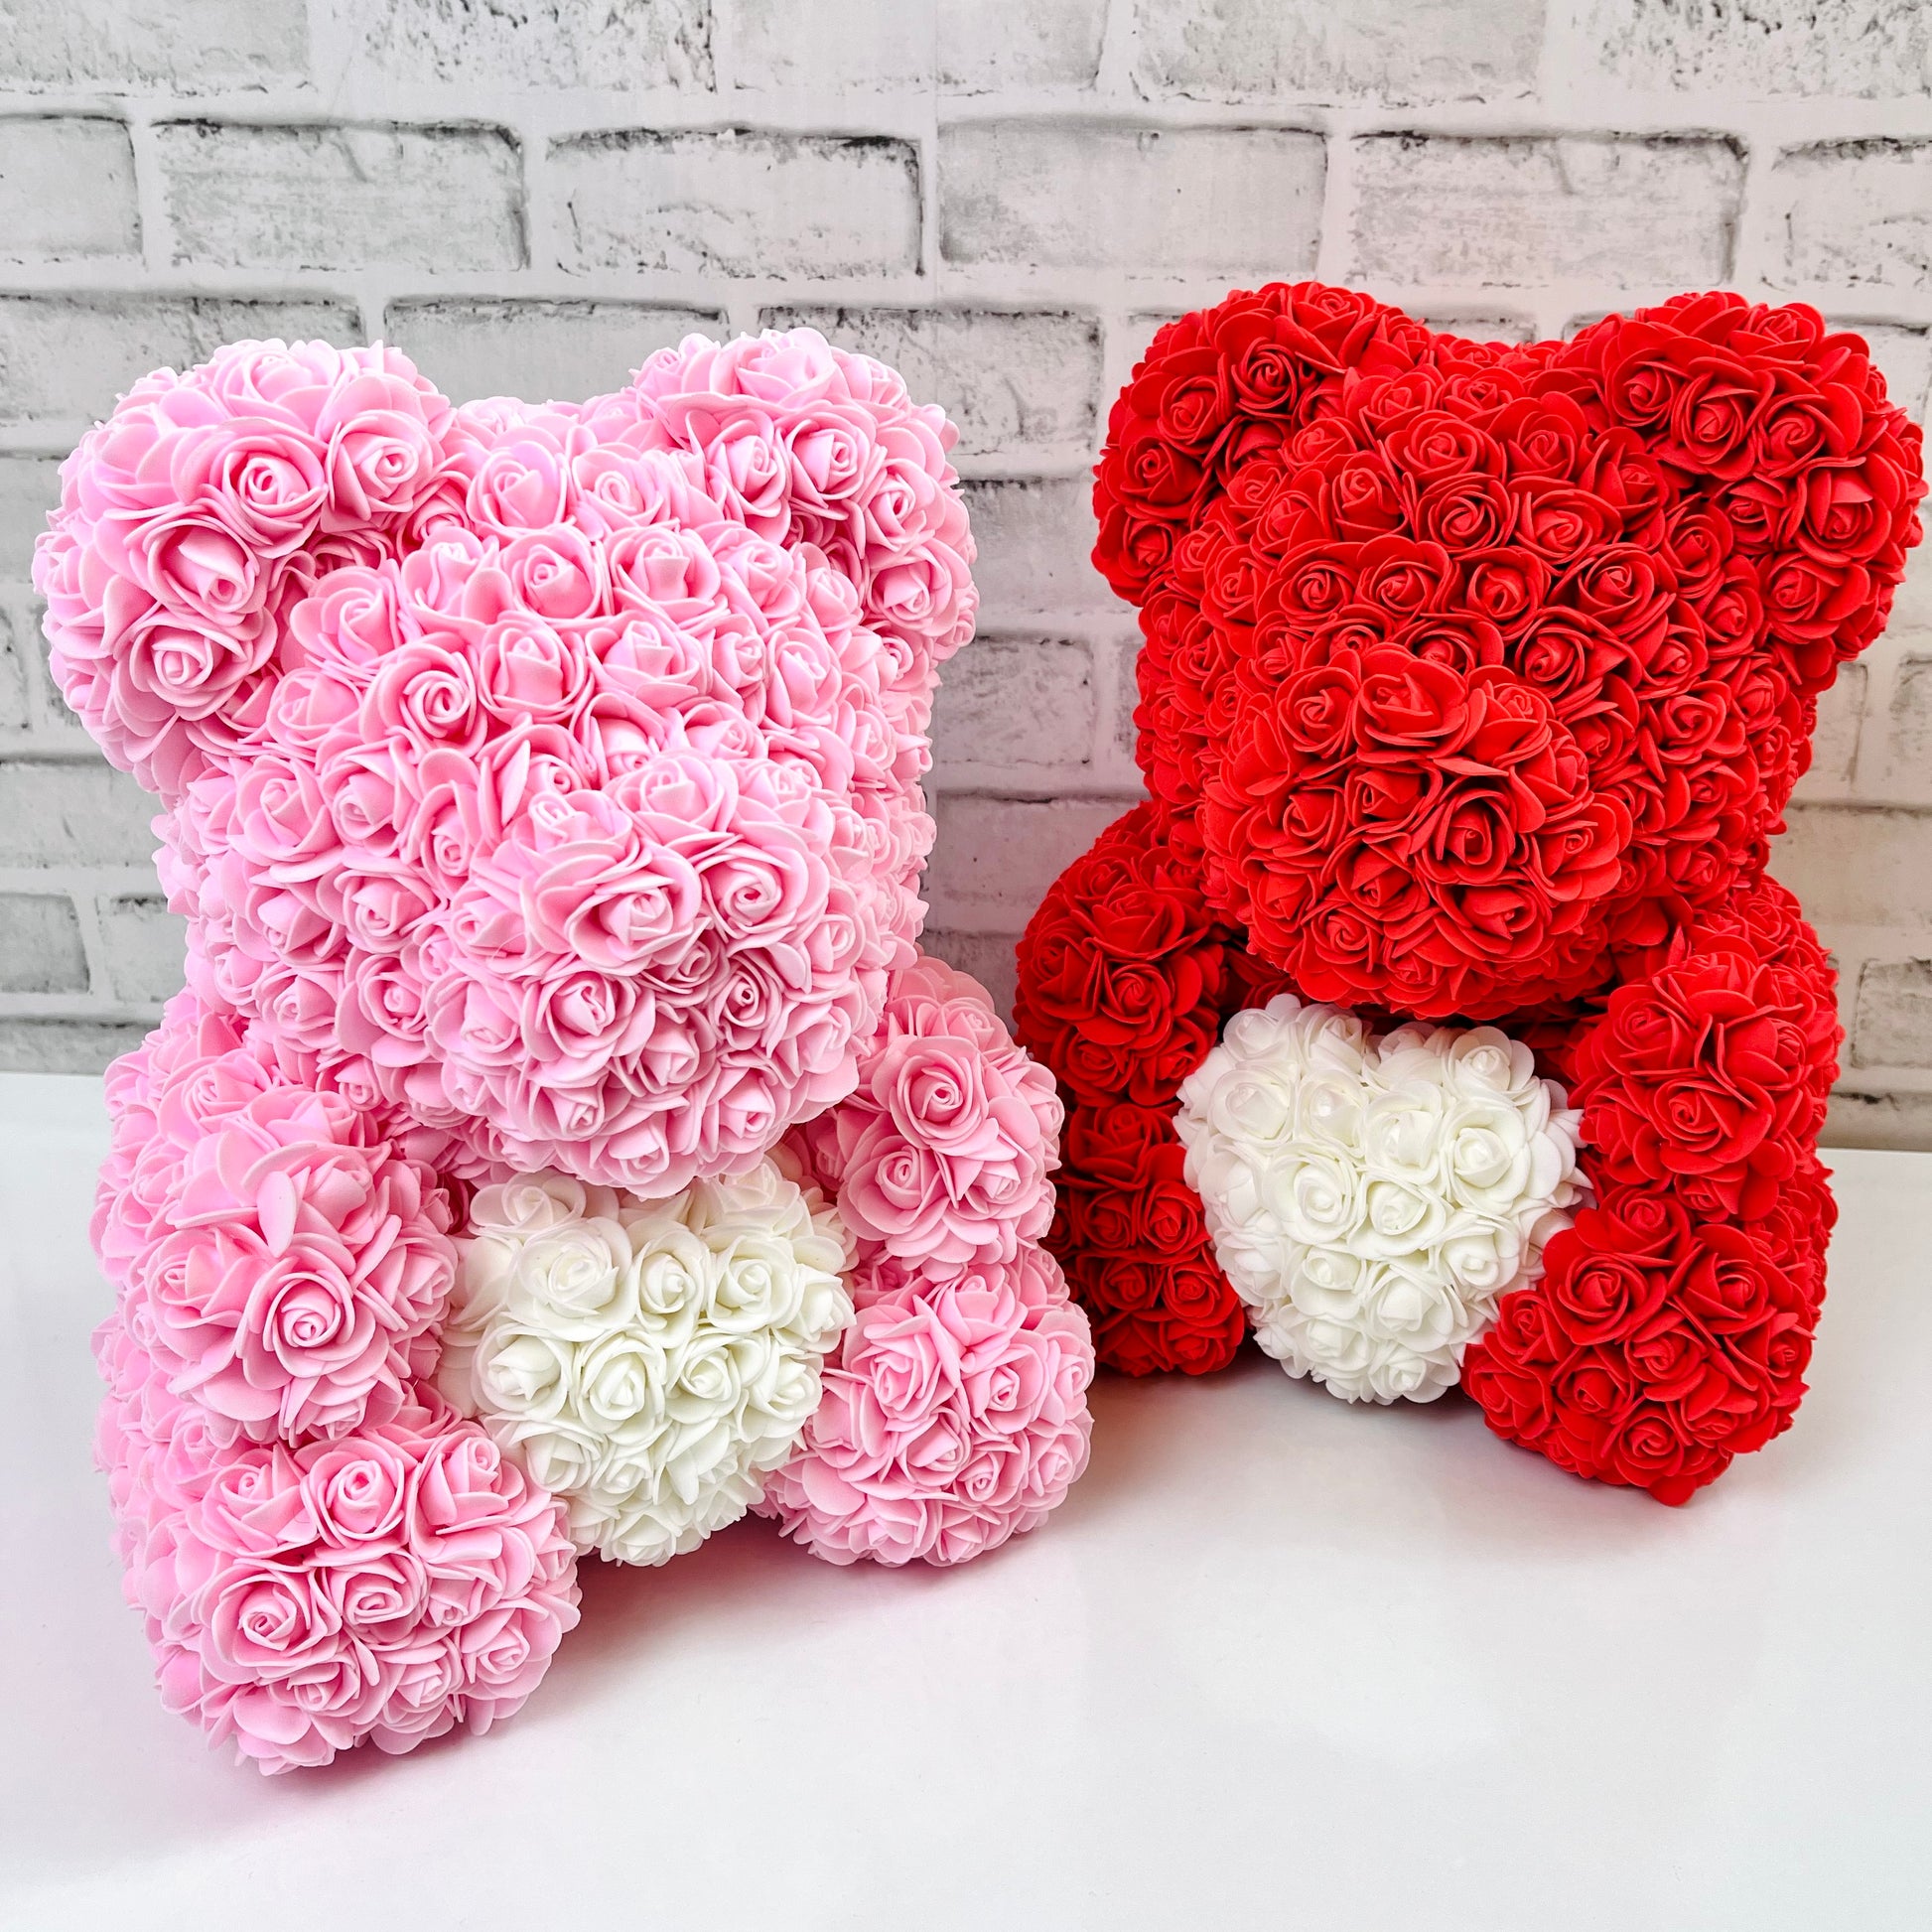 Rose Bear - Forever Red and Pink Rose Teddy Bears - Gift Boxed Rose Bears